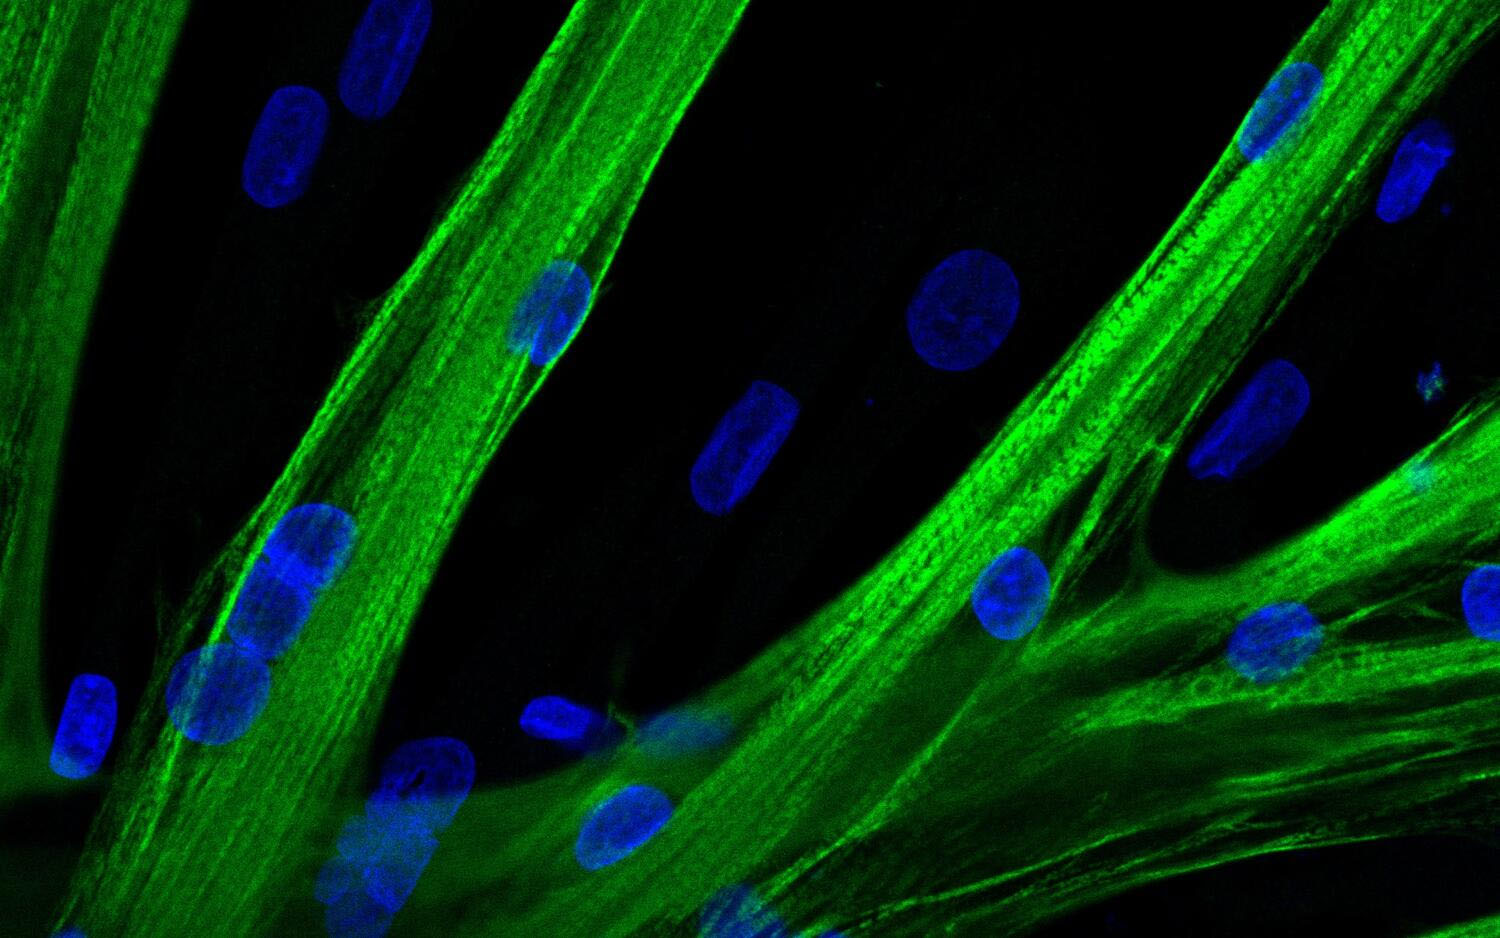 A myosin heavy chain is seen in green and the nuclei in blue